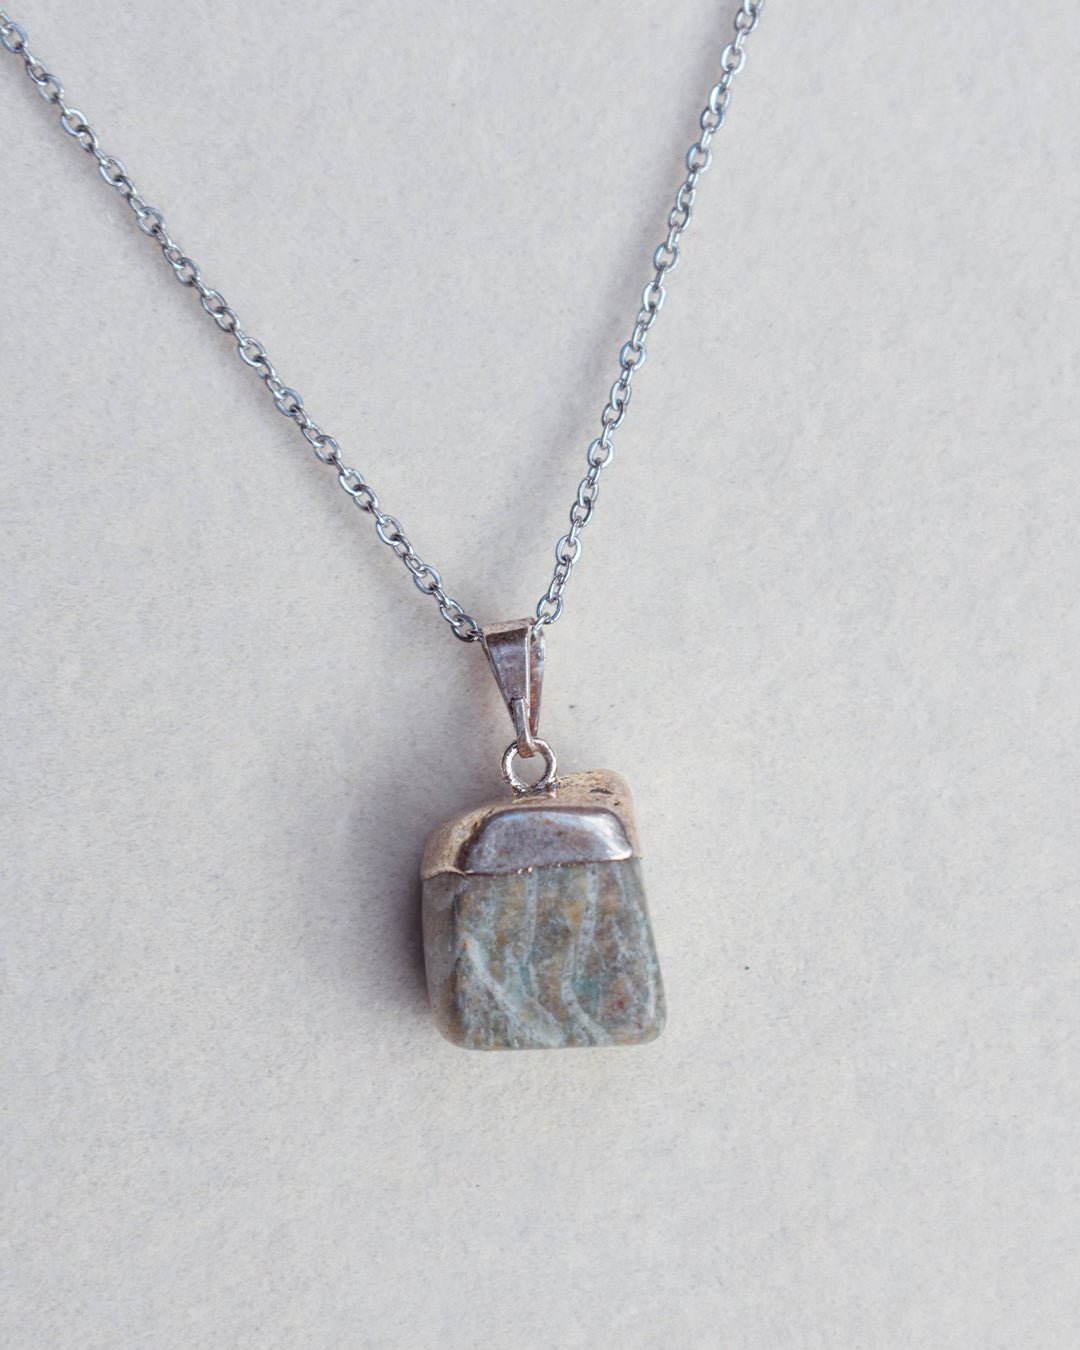 Stainless Steel chain with Amazonite crystal pendant